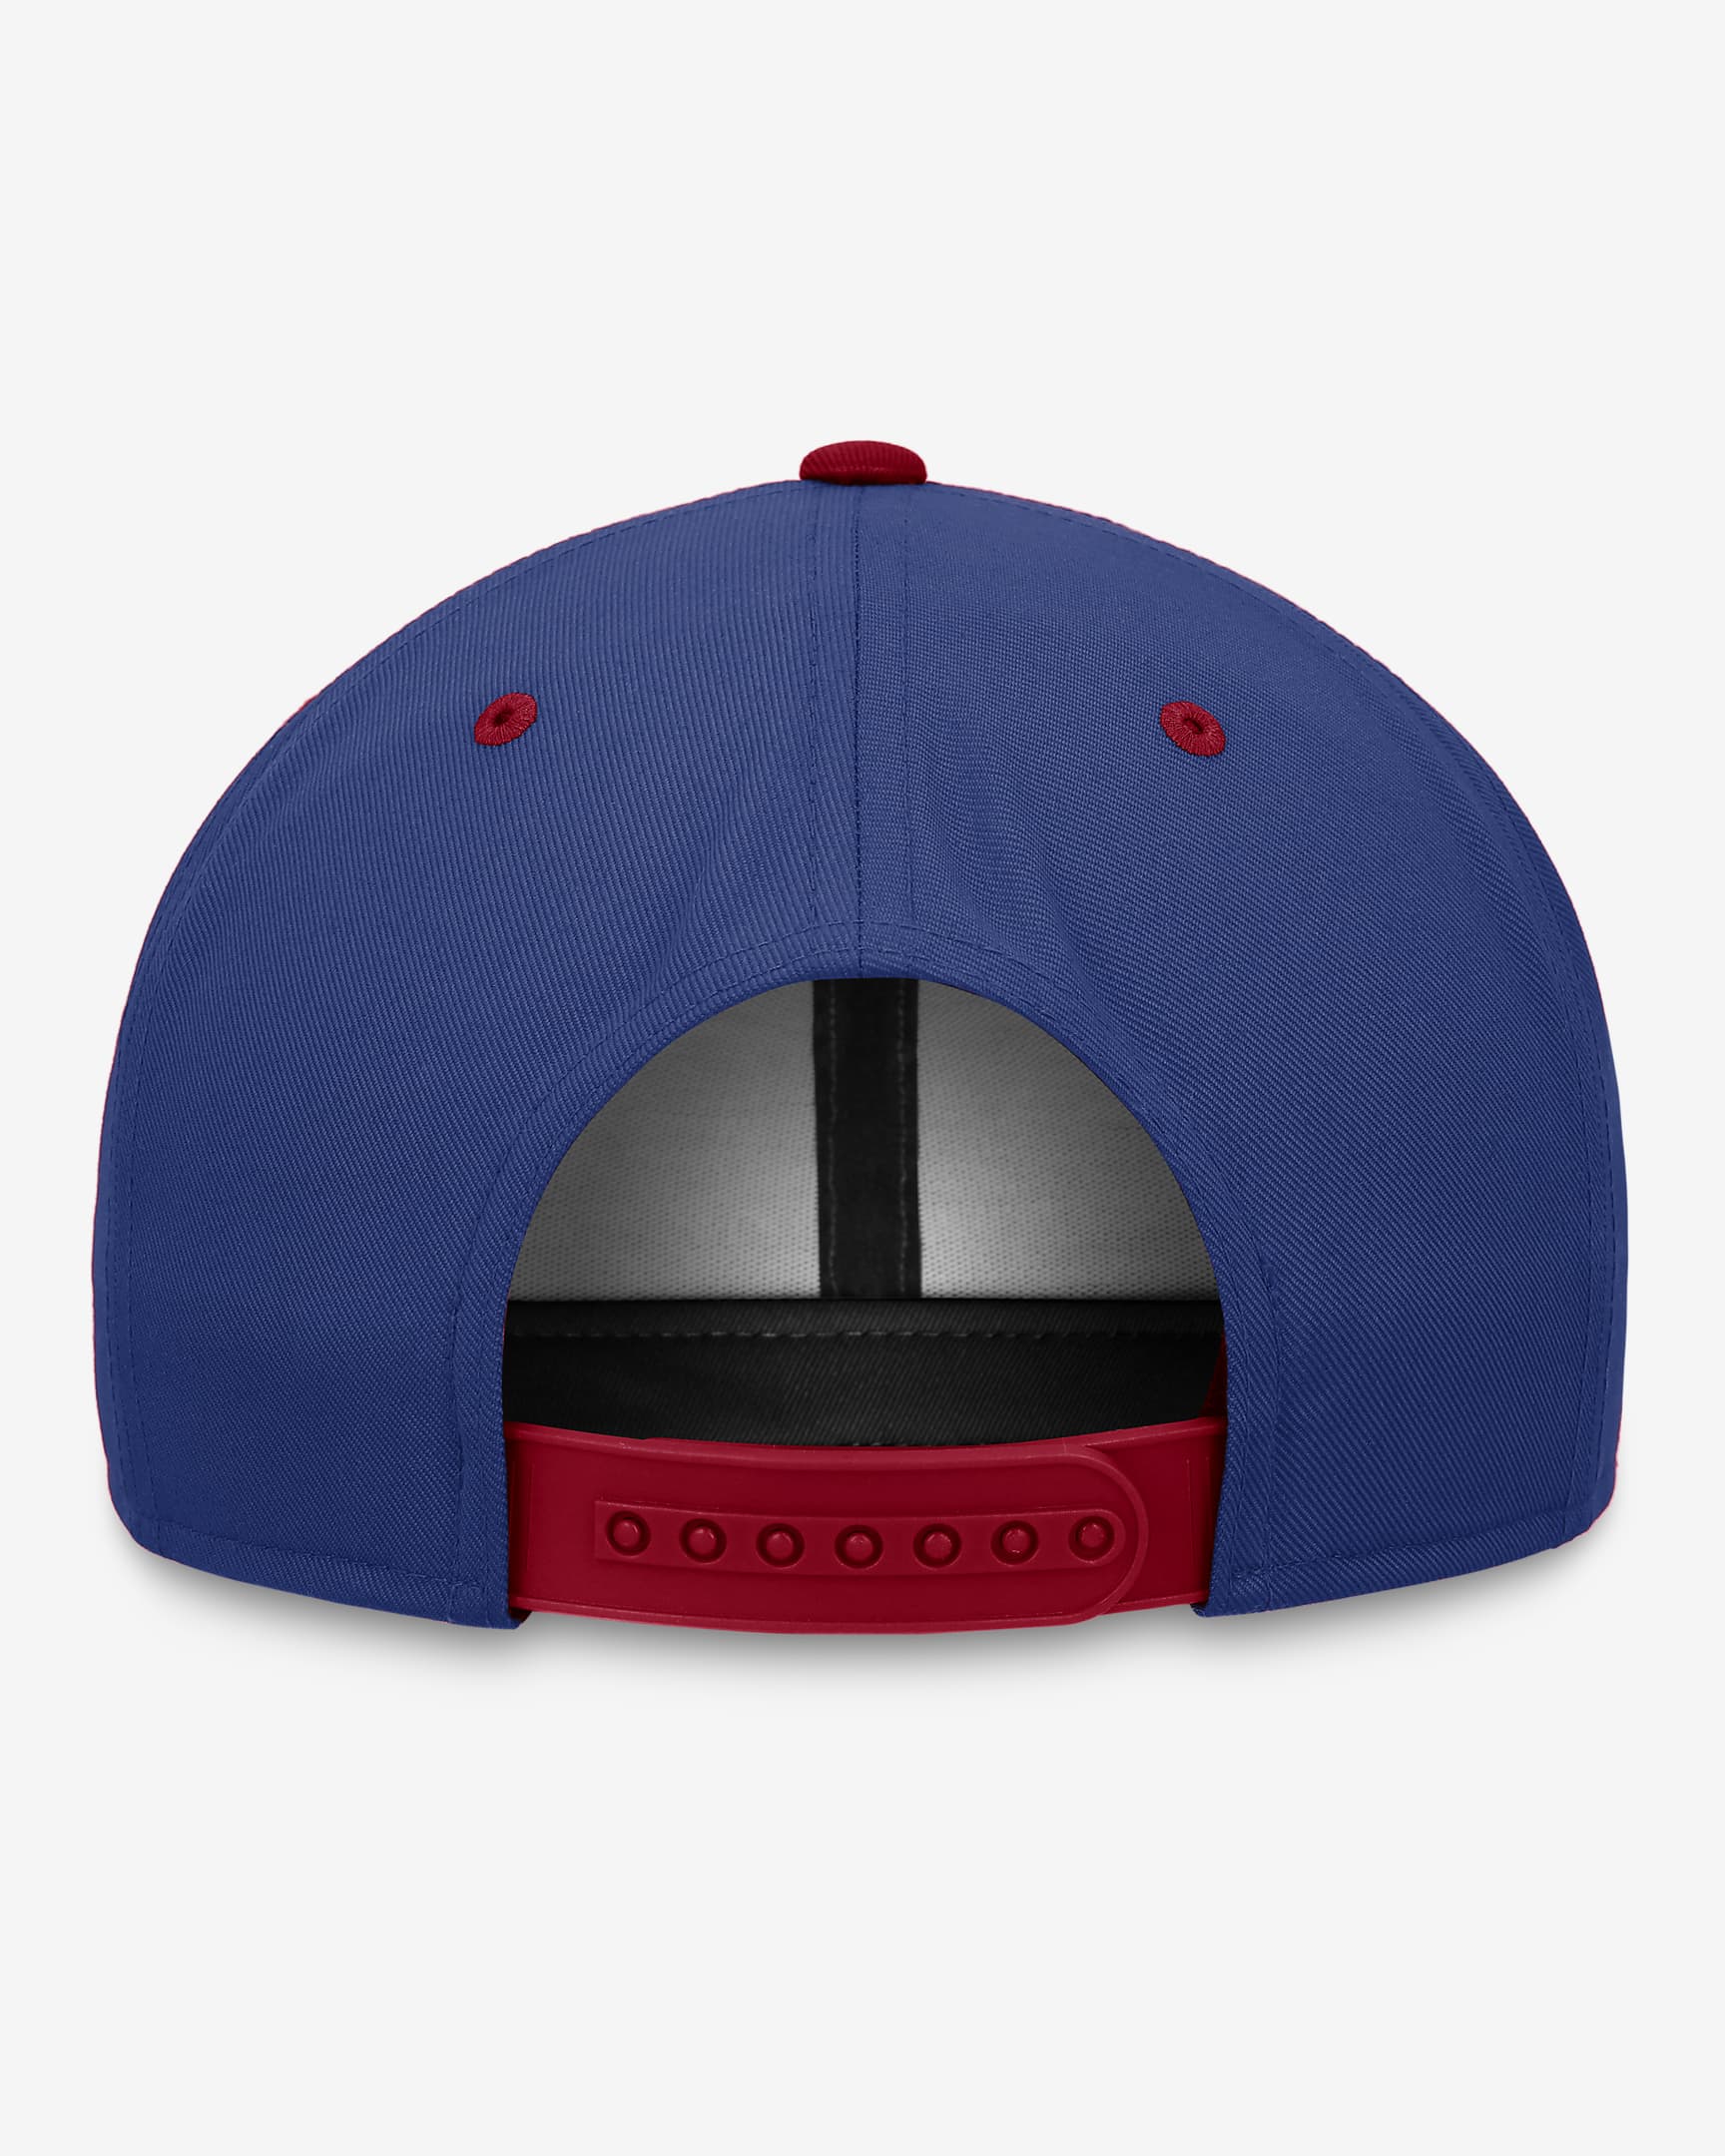 Gorra ajustable Nike MLB para hombre Chicago Cubs Pro Cooperstown. Nike.com